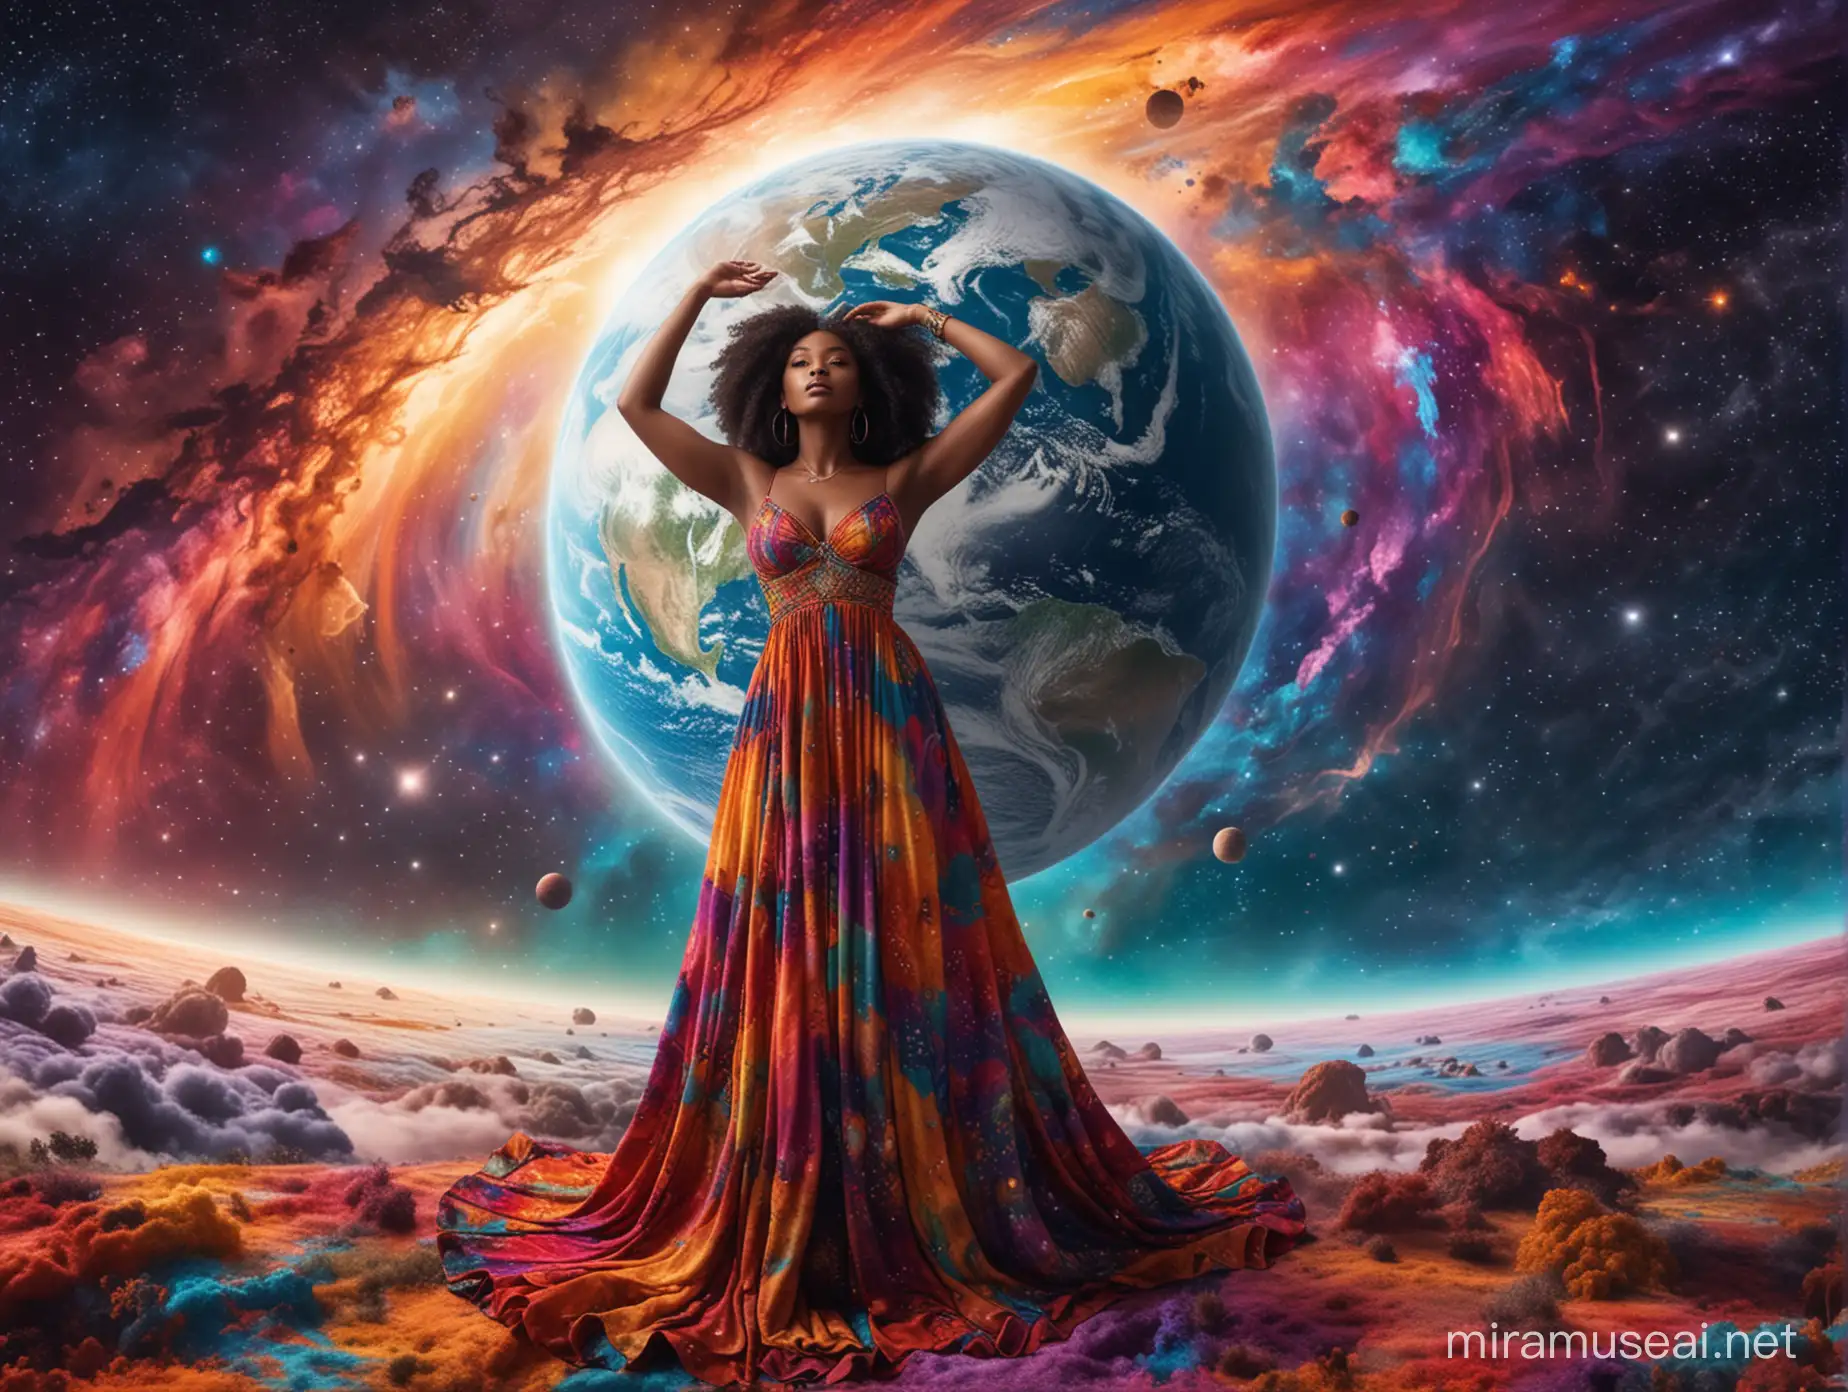 A beautiful full-bodied black women standing in the middle of a colorful universe with a flowy, colorful dress on and holding a massive Earth above her head.